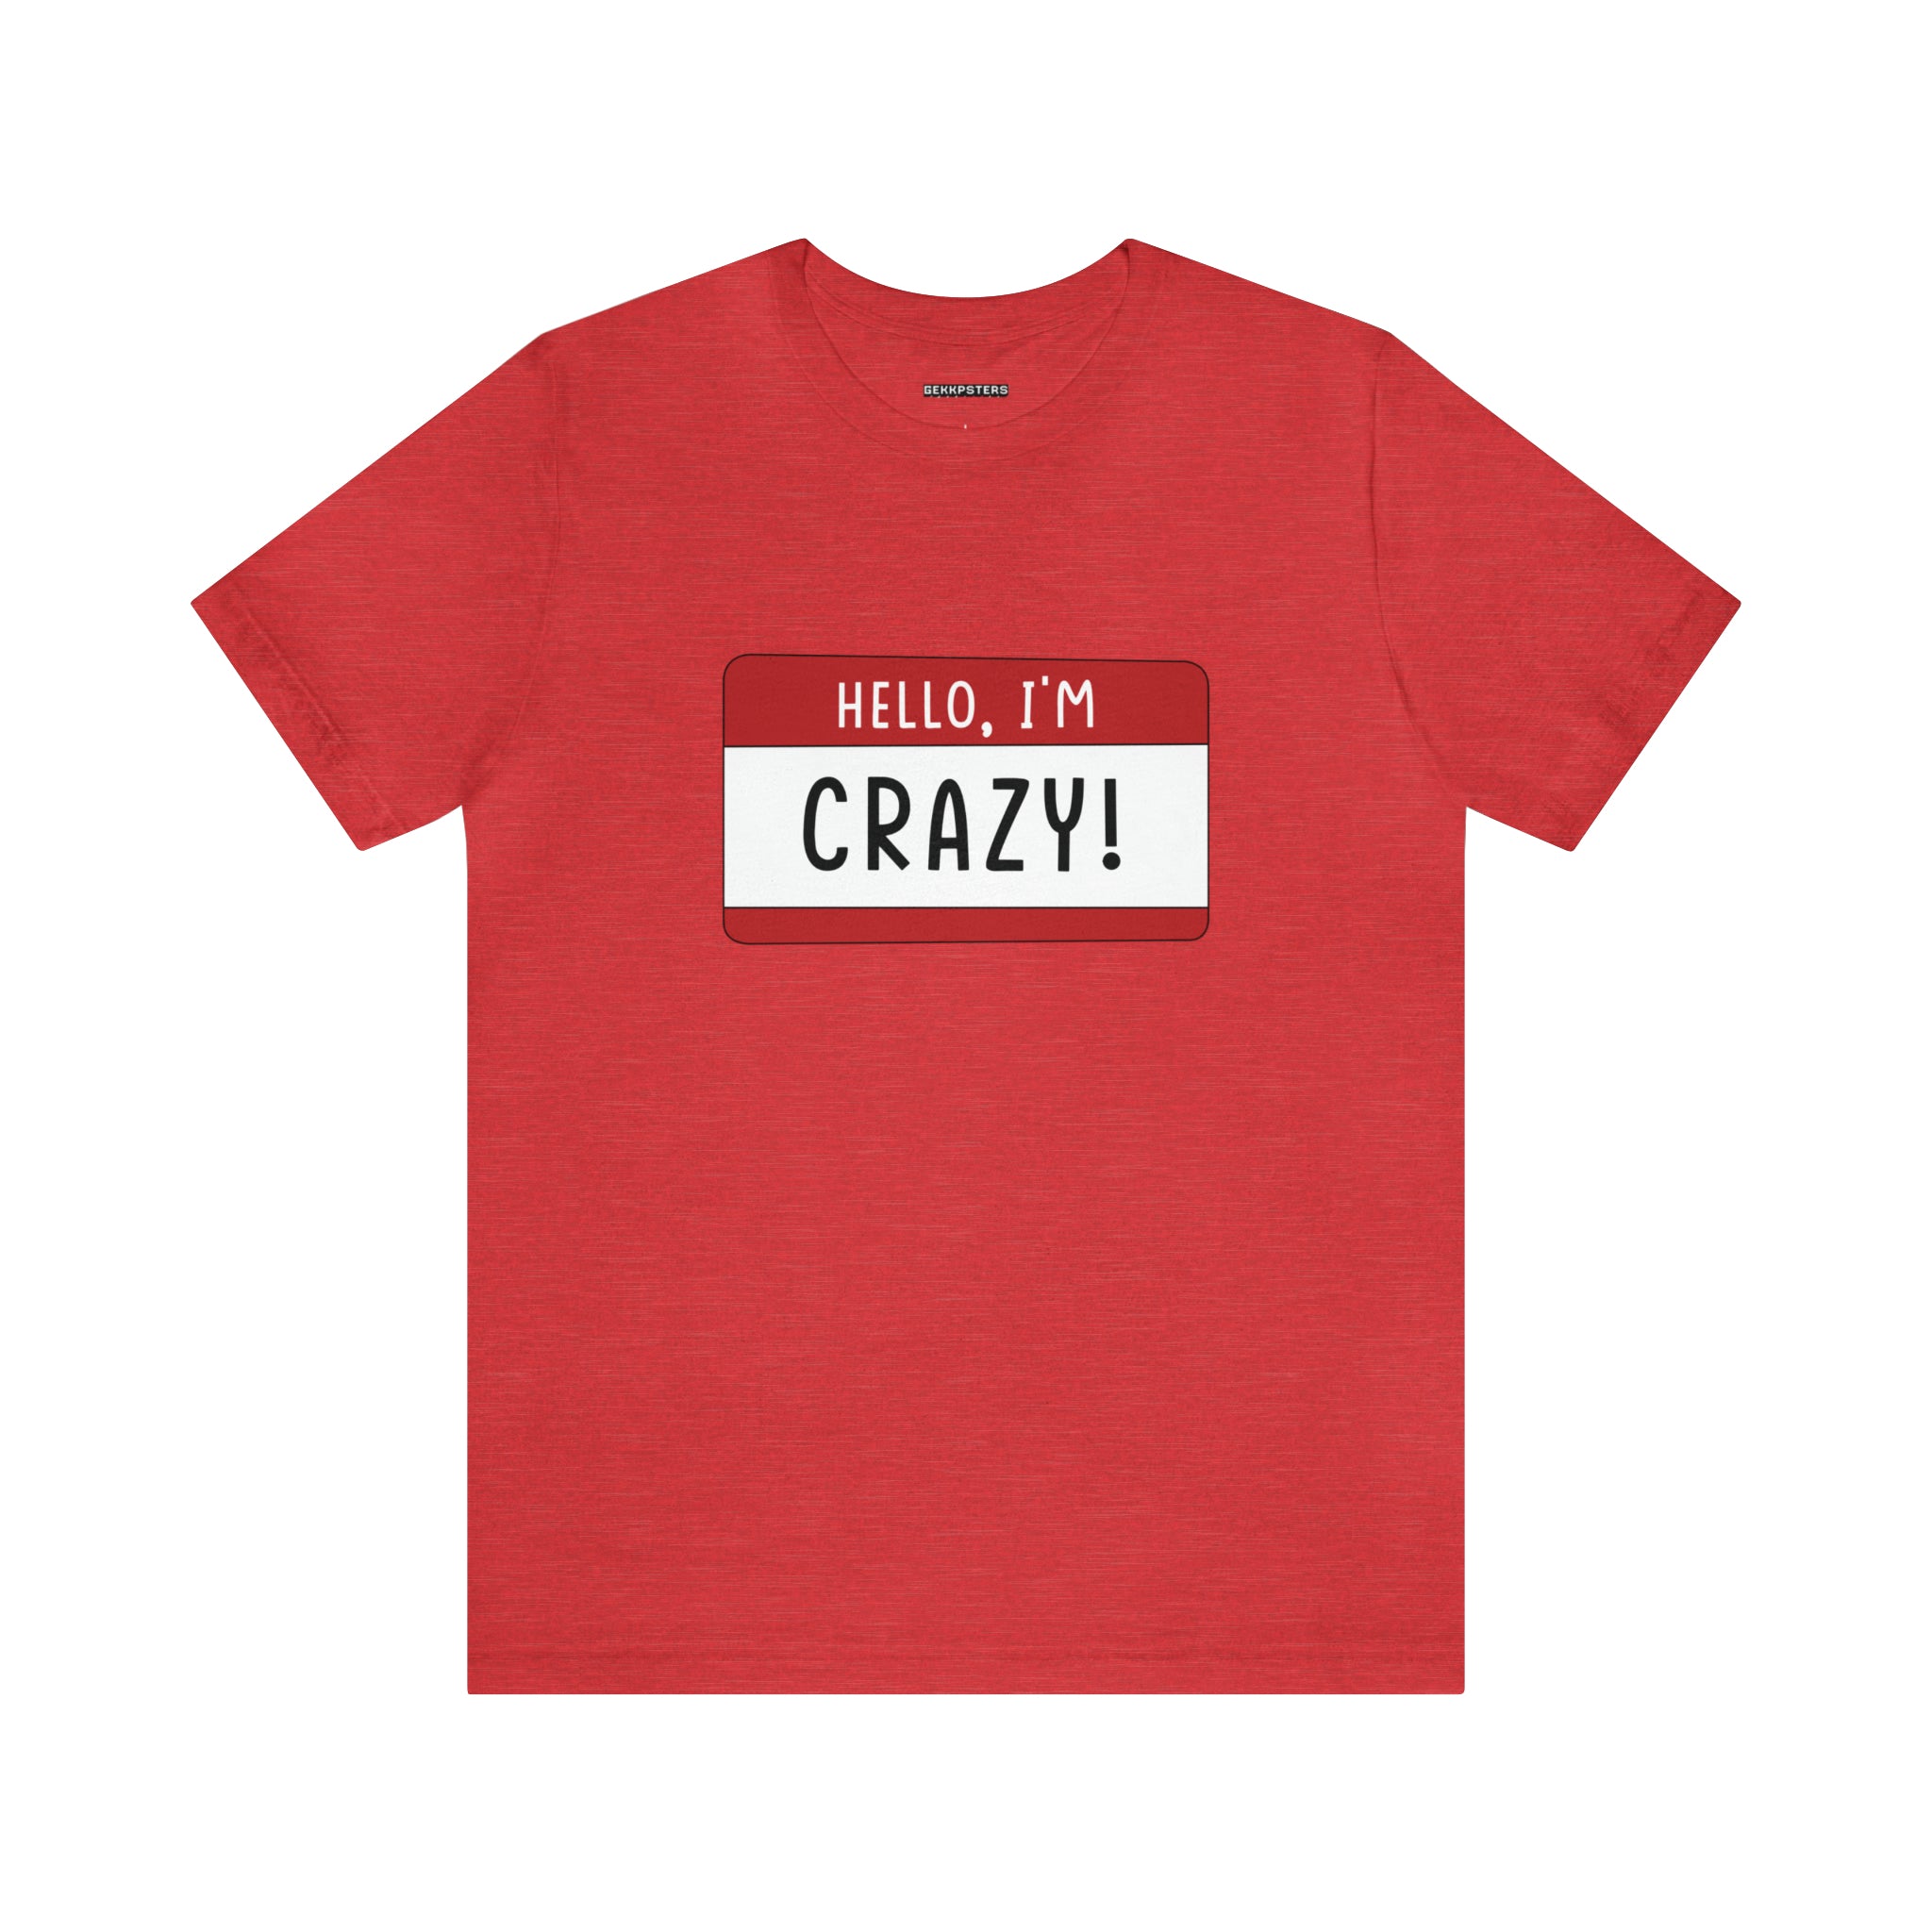 Hello, I'm CRAZY T-Shirt featuring a white name tag graphic with the text "hello, i'm crazy!" on the chest, embodying a quirky design.